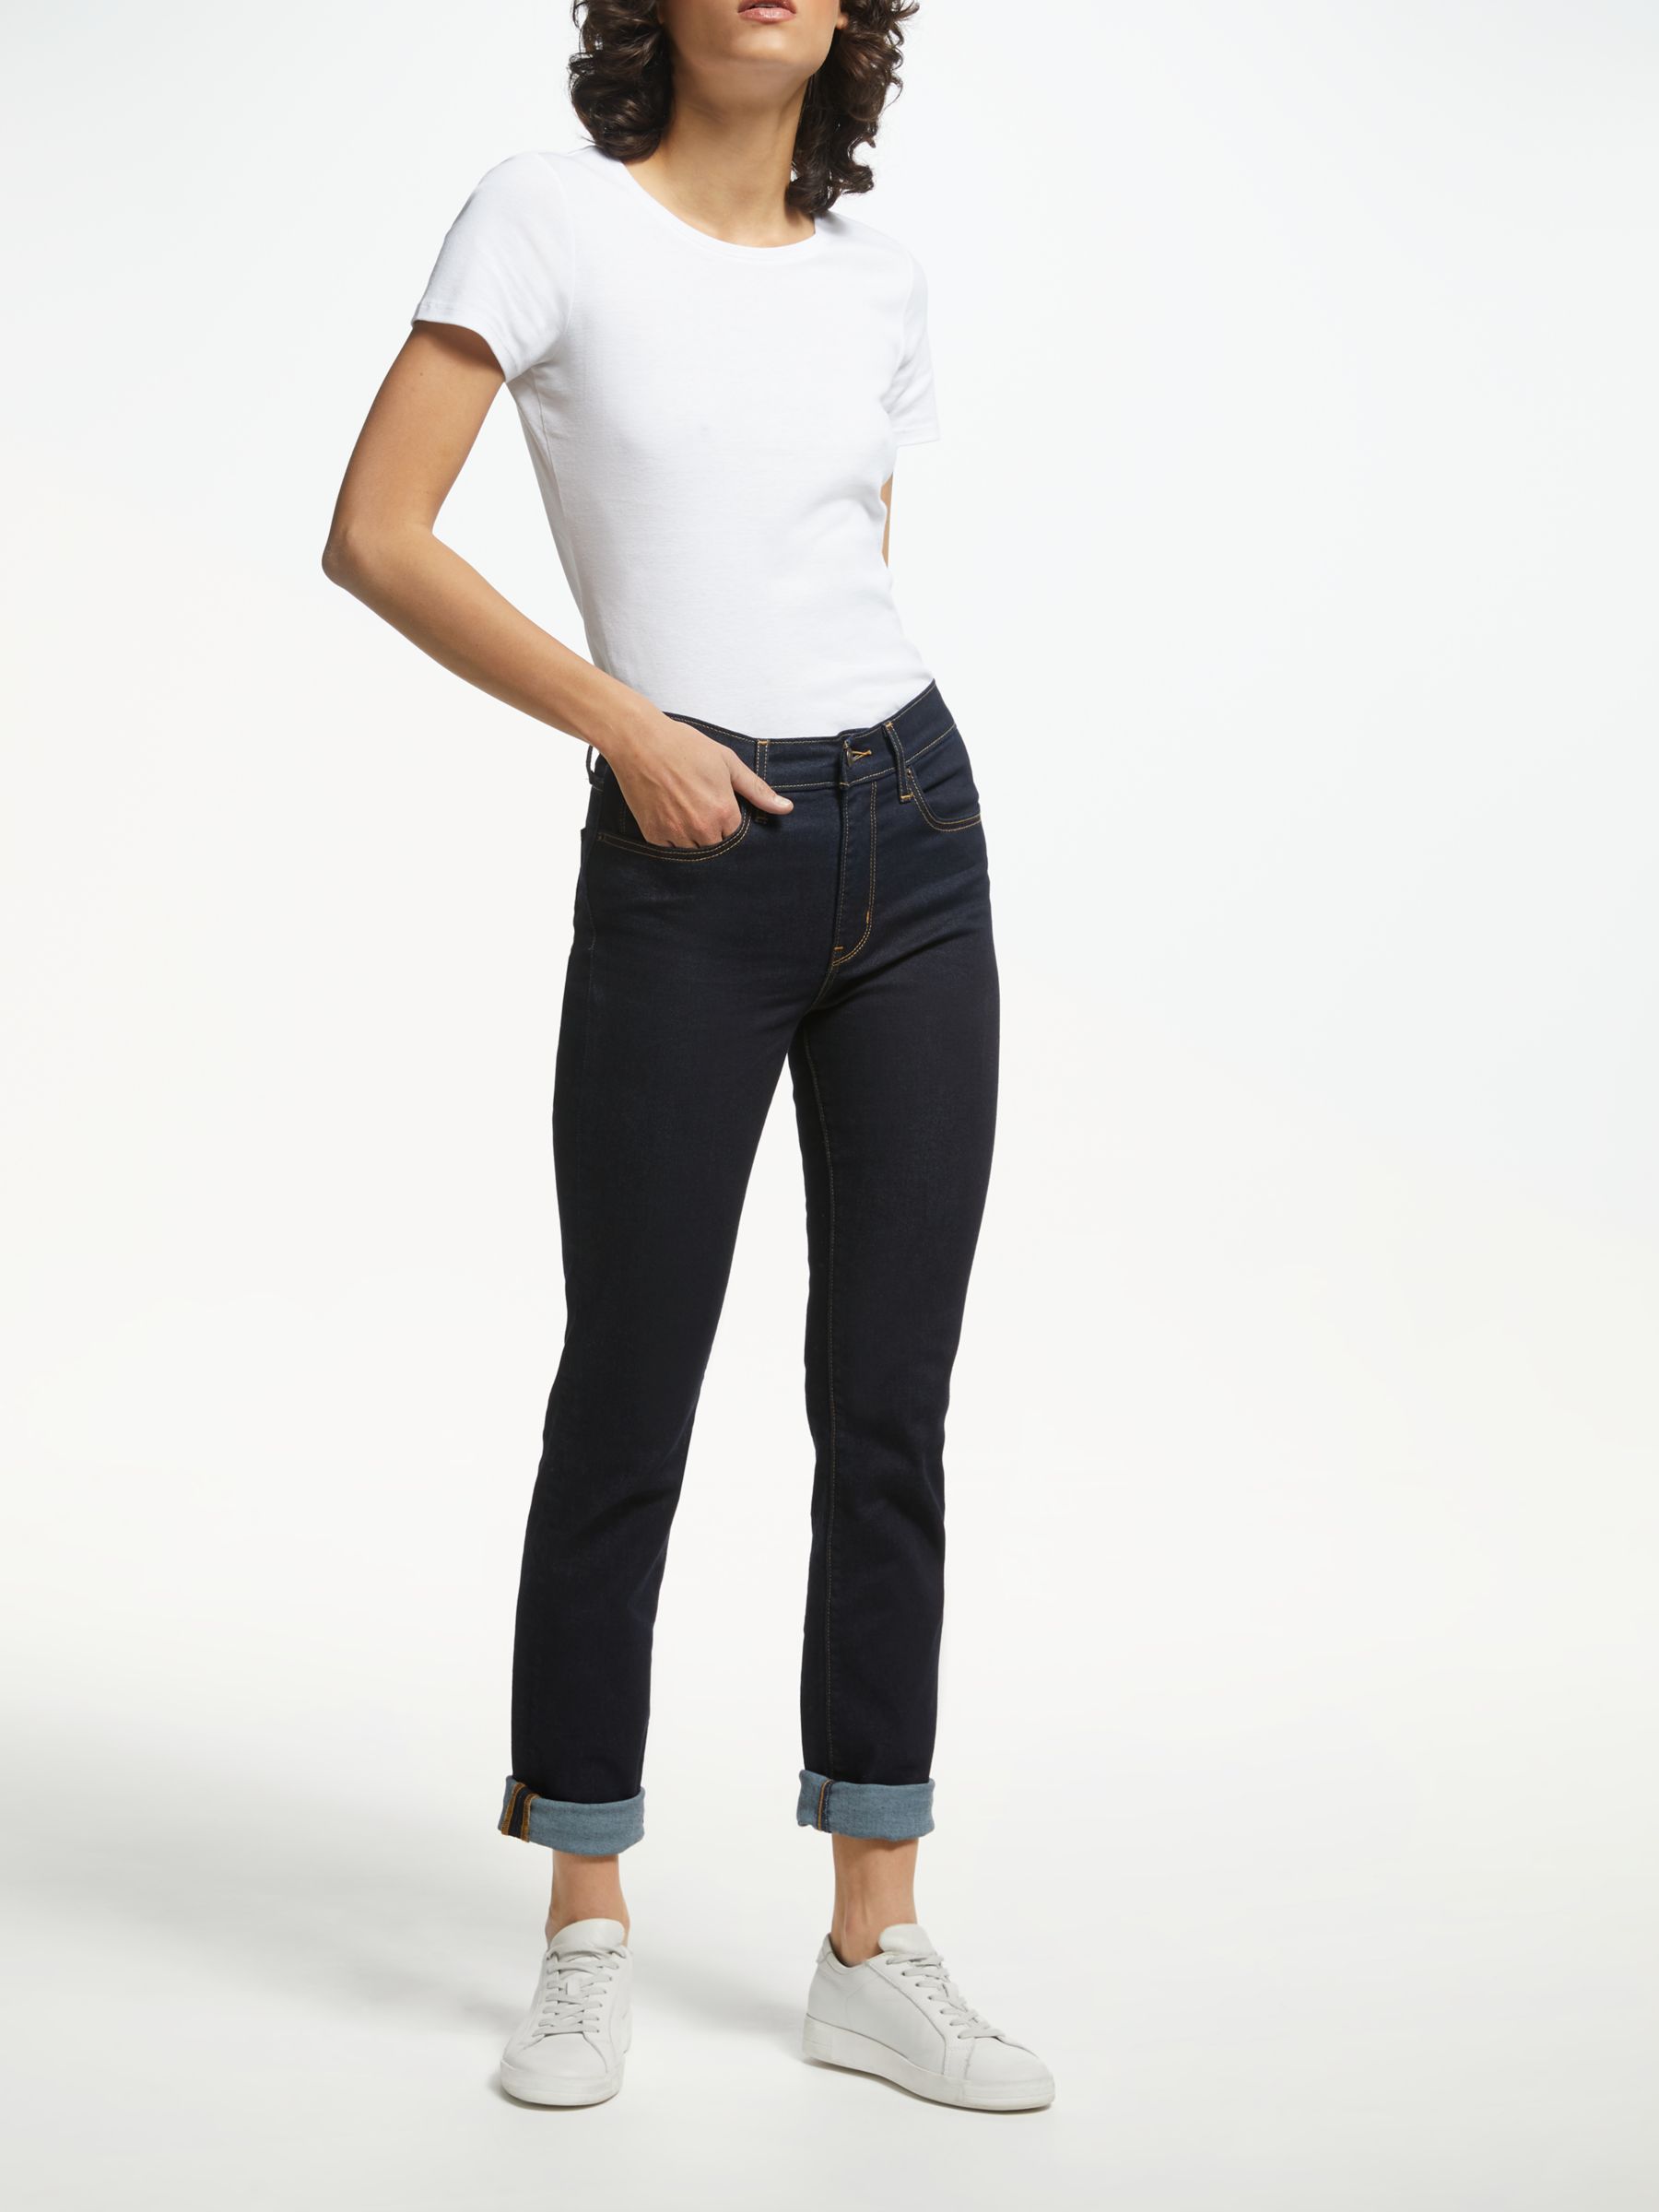 levis white top womens